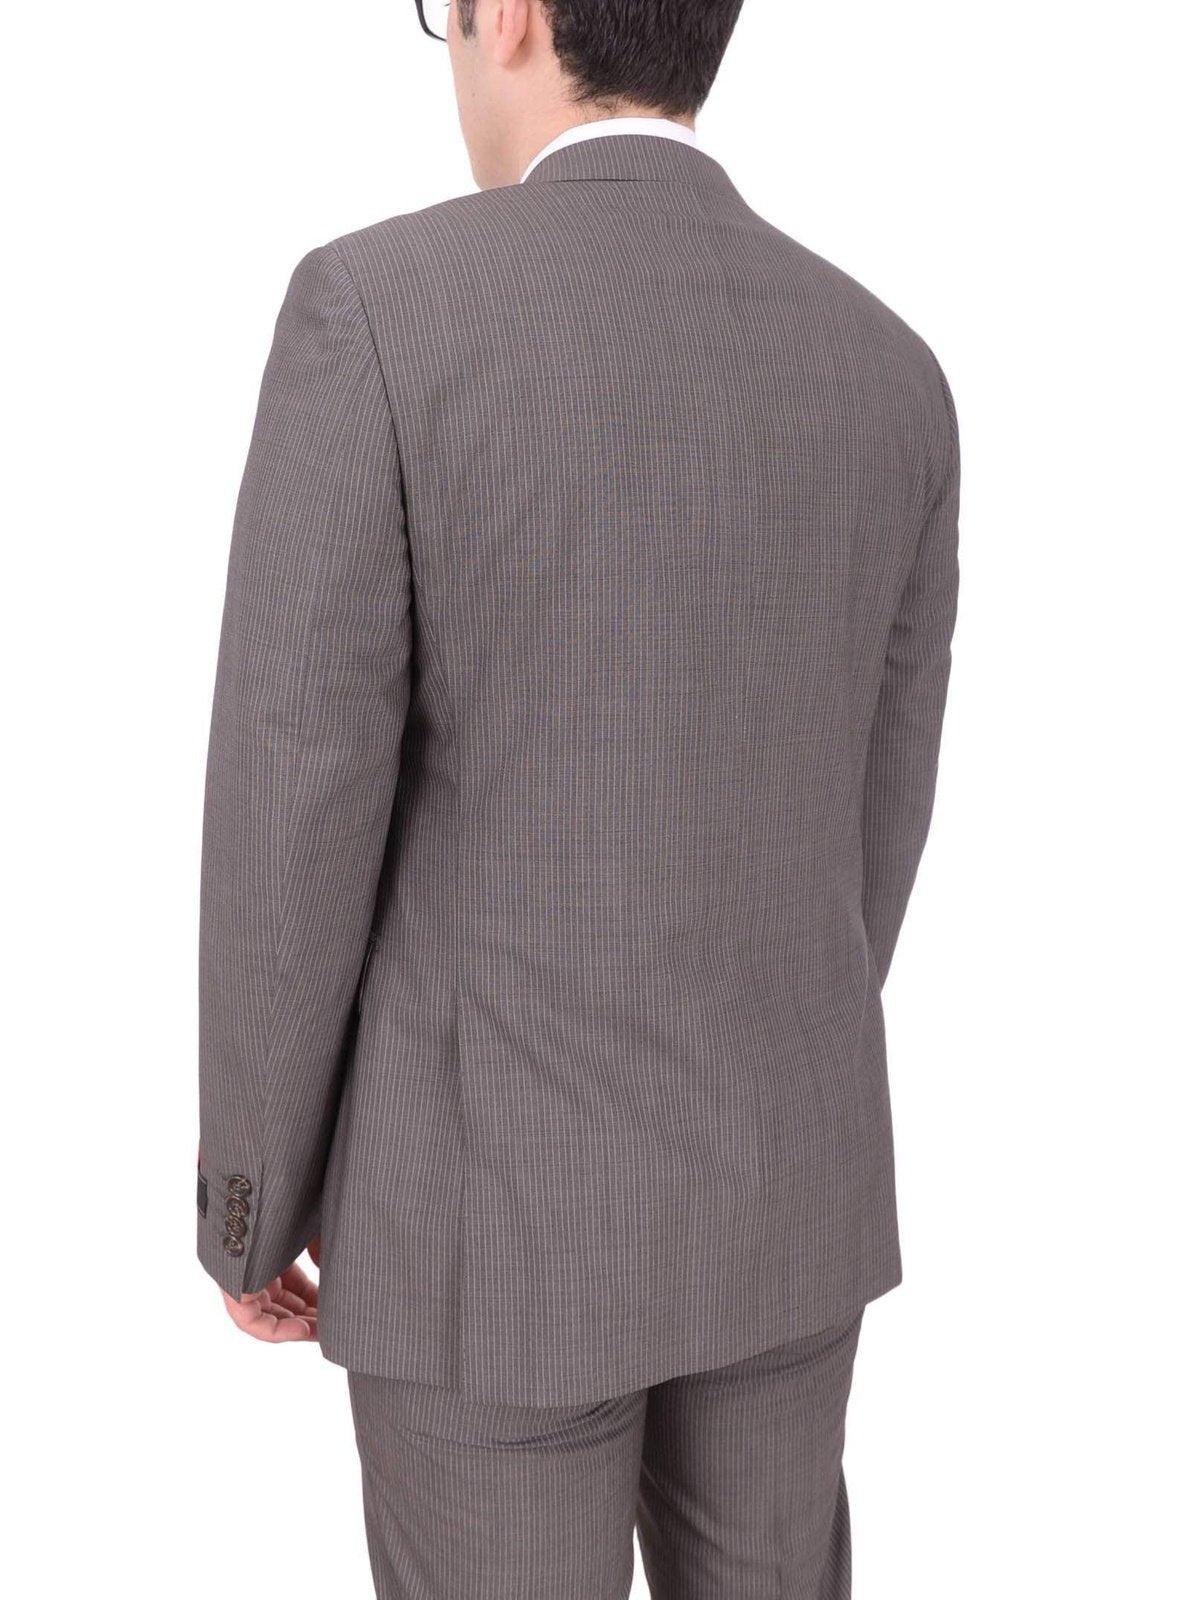 Napoli TWO PIECE SUITS Mens Napoli Slim Fit Gray Pinstriped Half Canvassed Marzotto Wool Suit